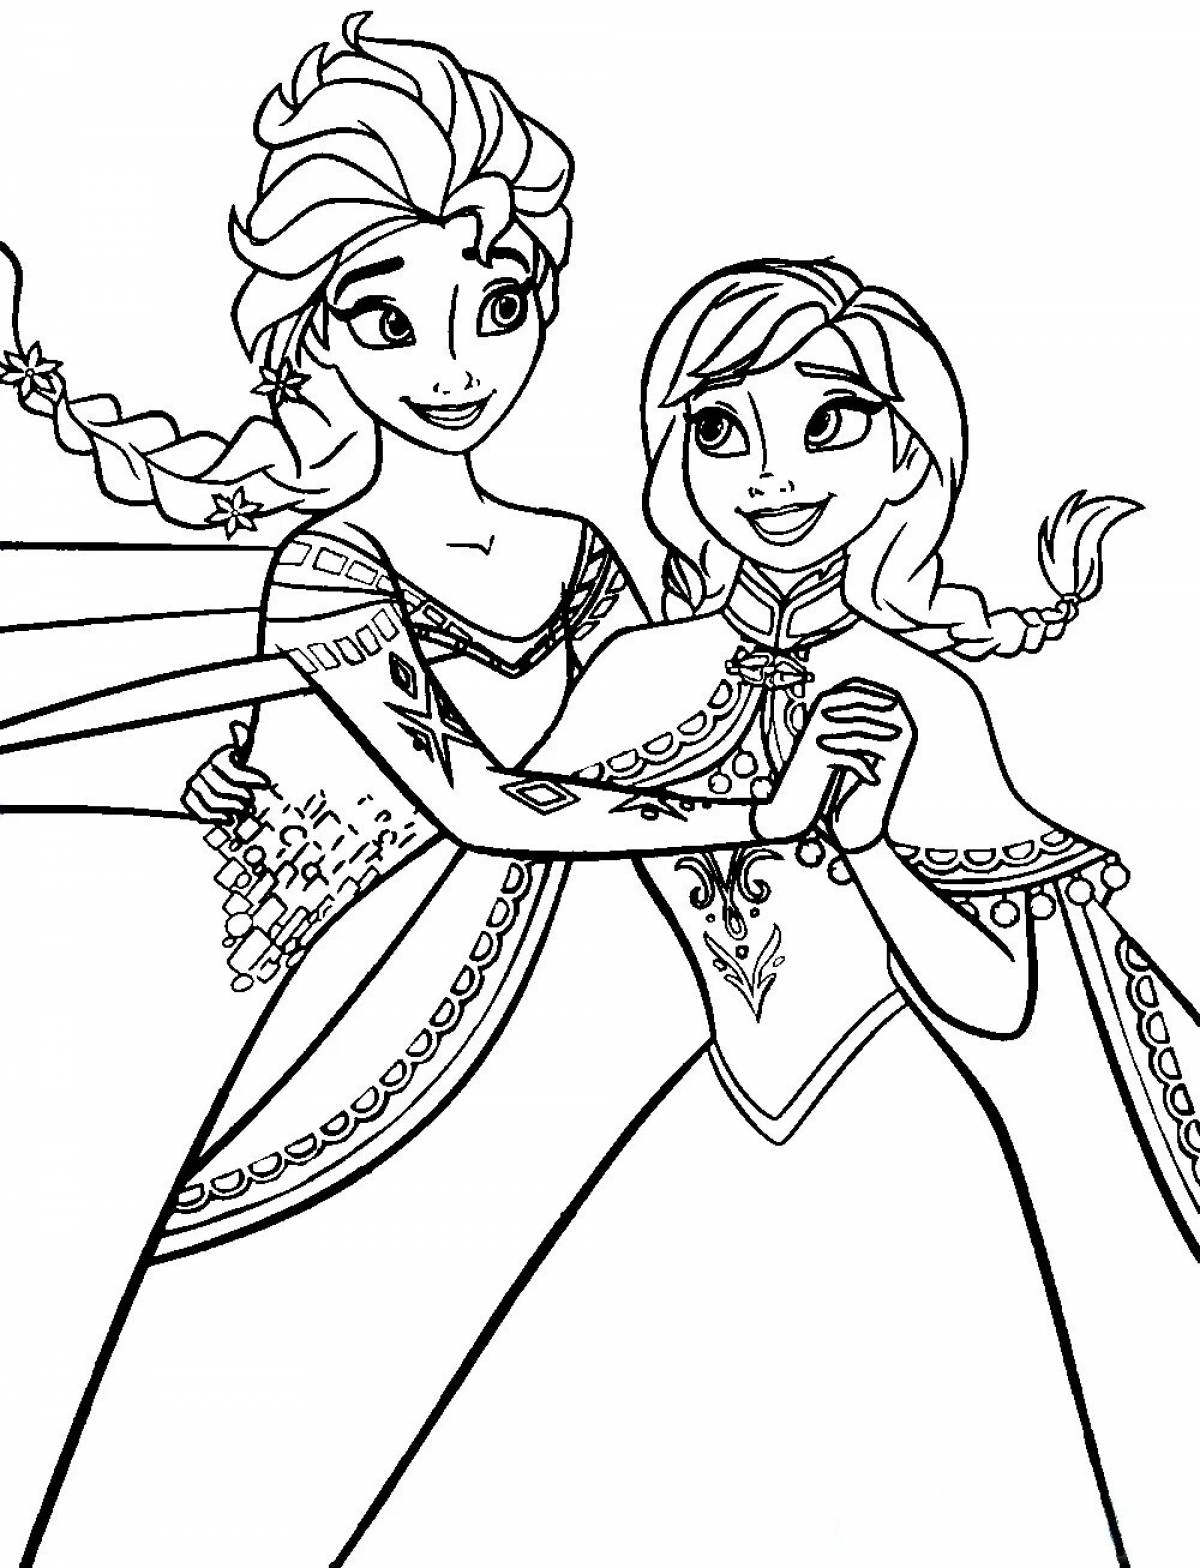 Elsa and anna in good quality #6